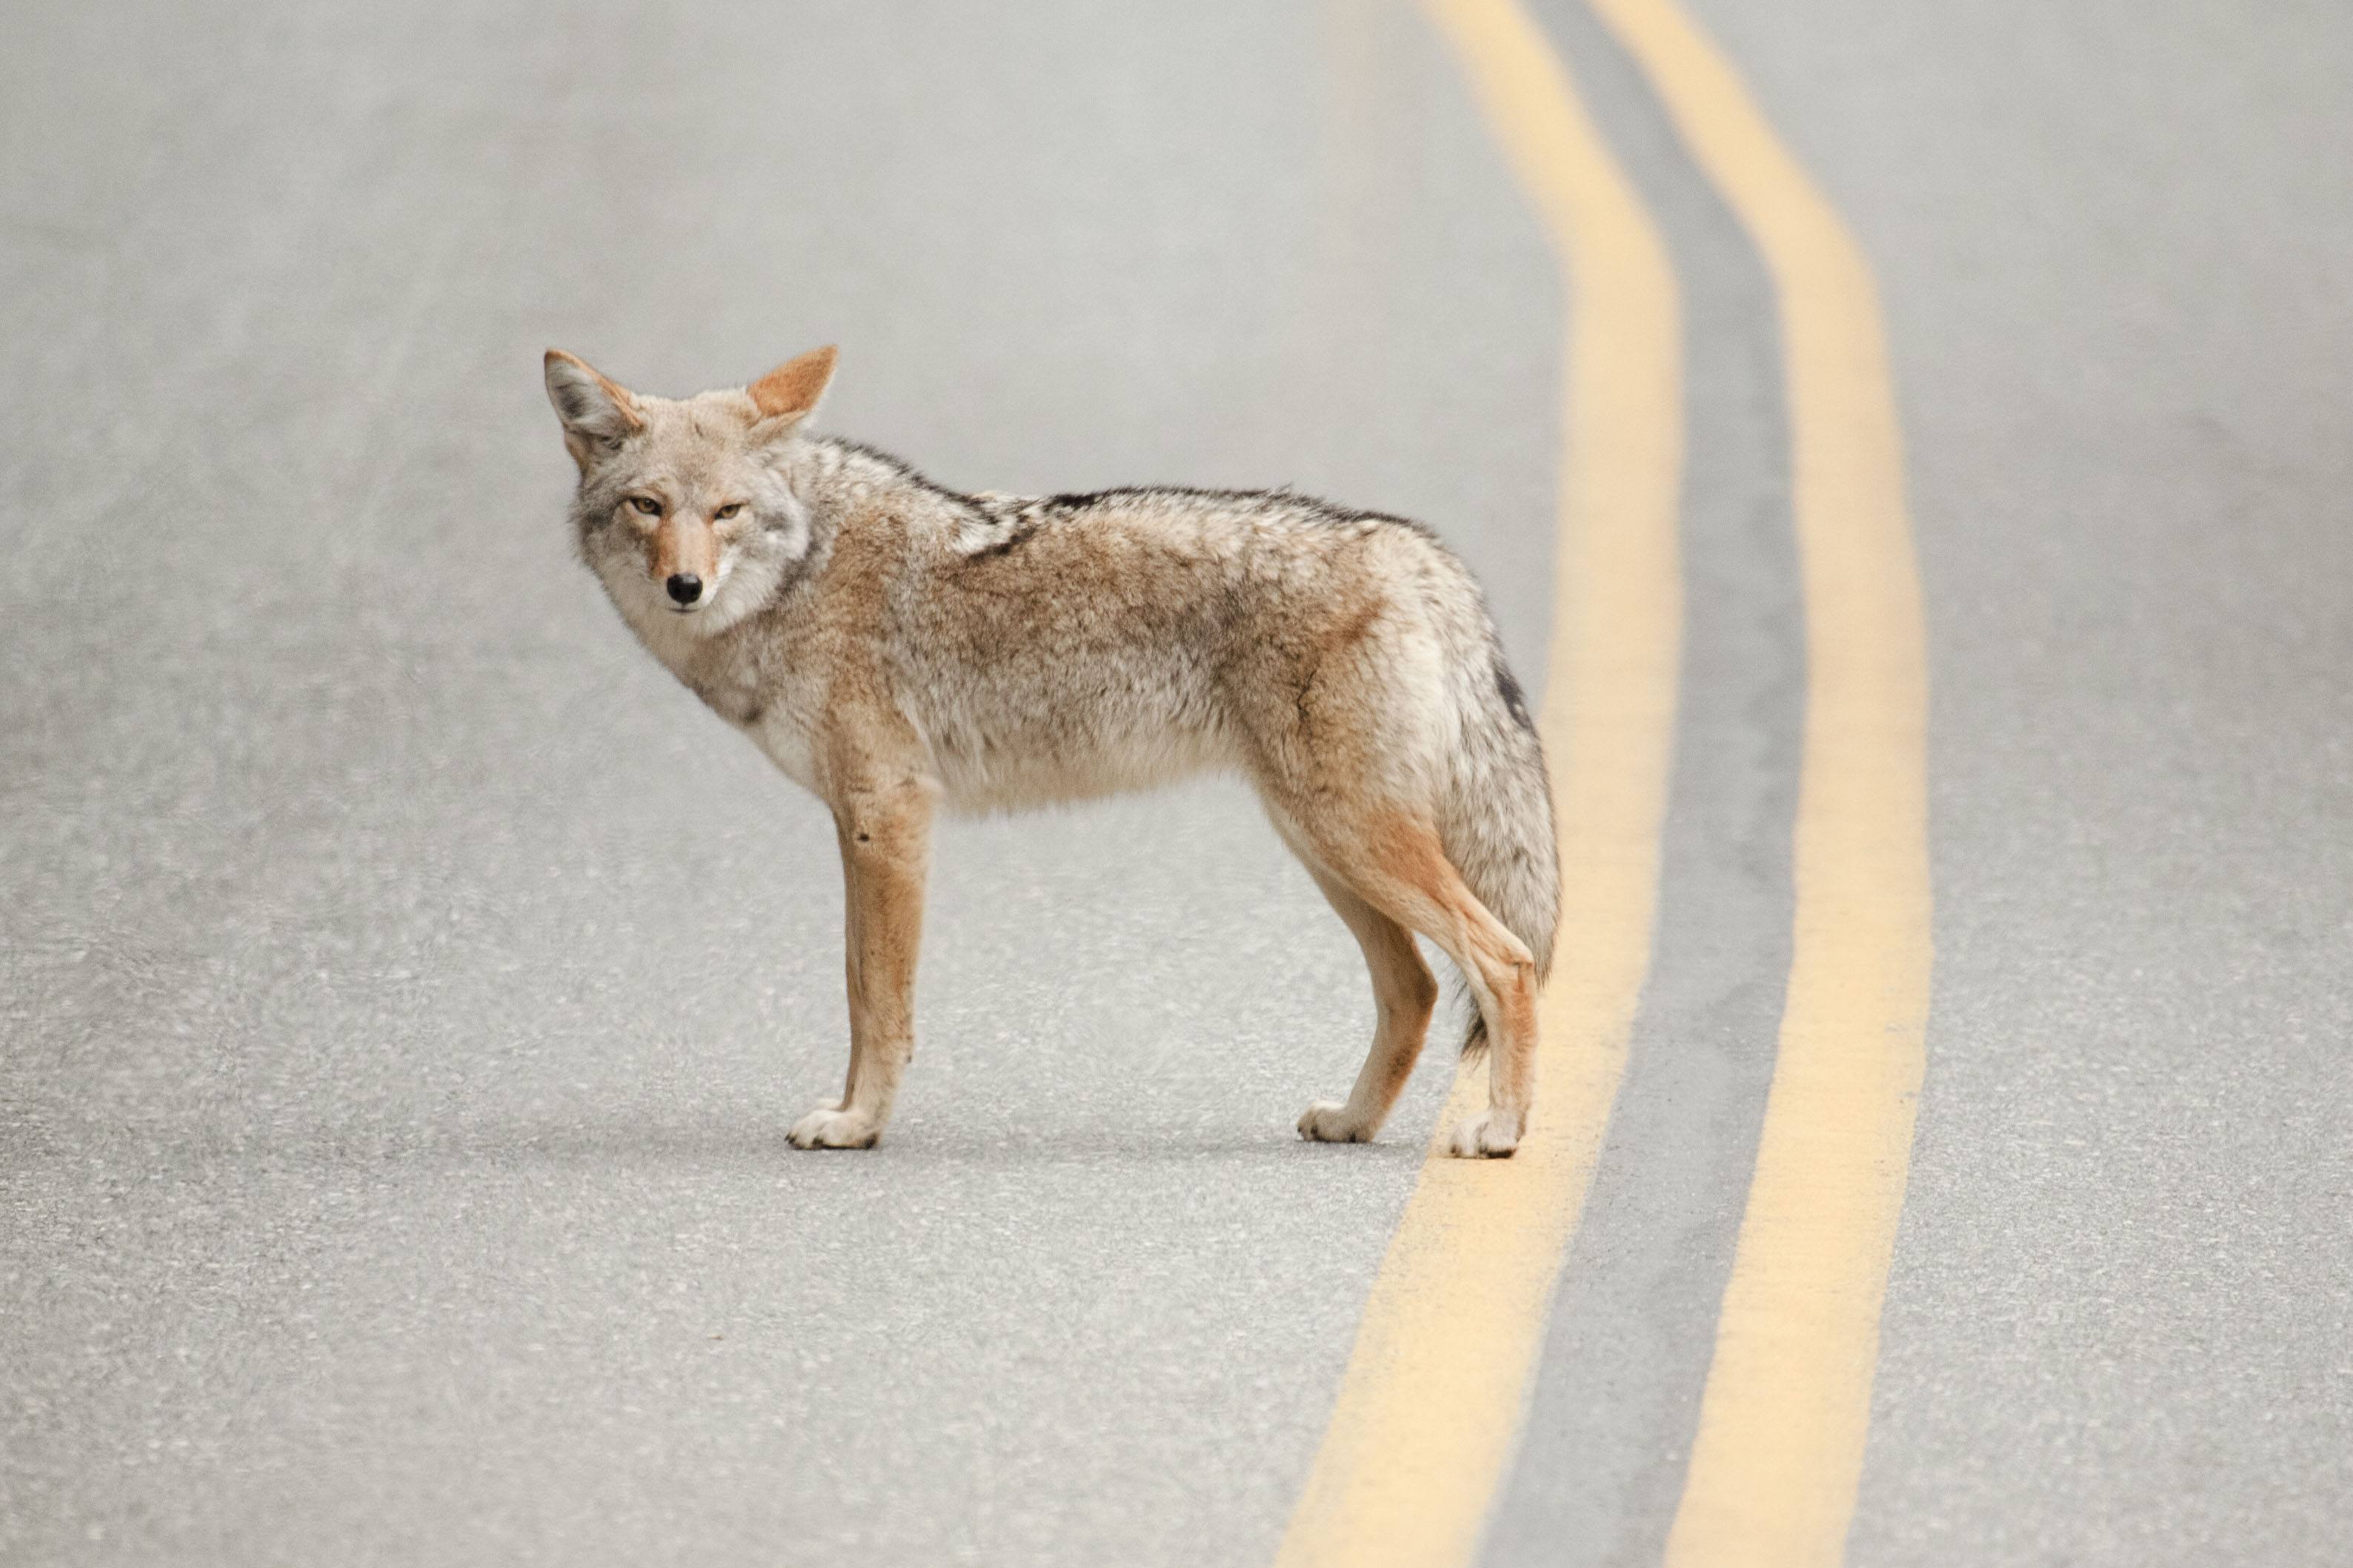 coyote on road